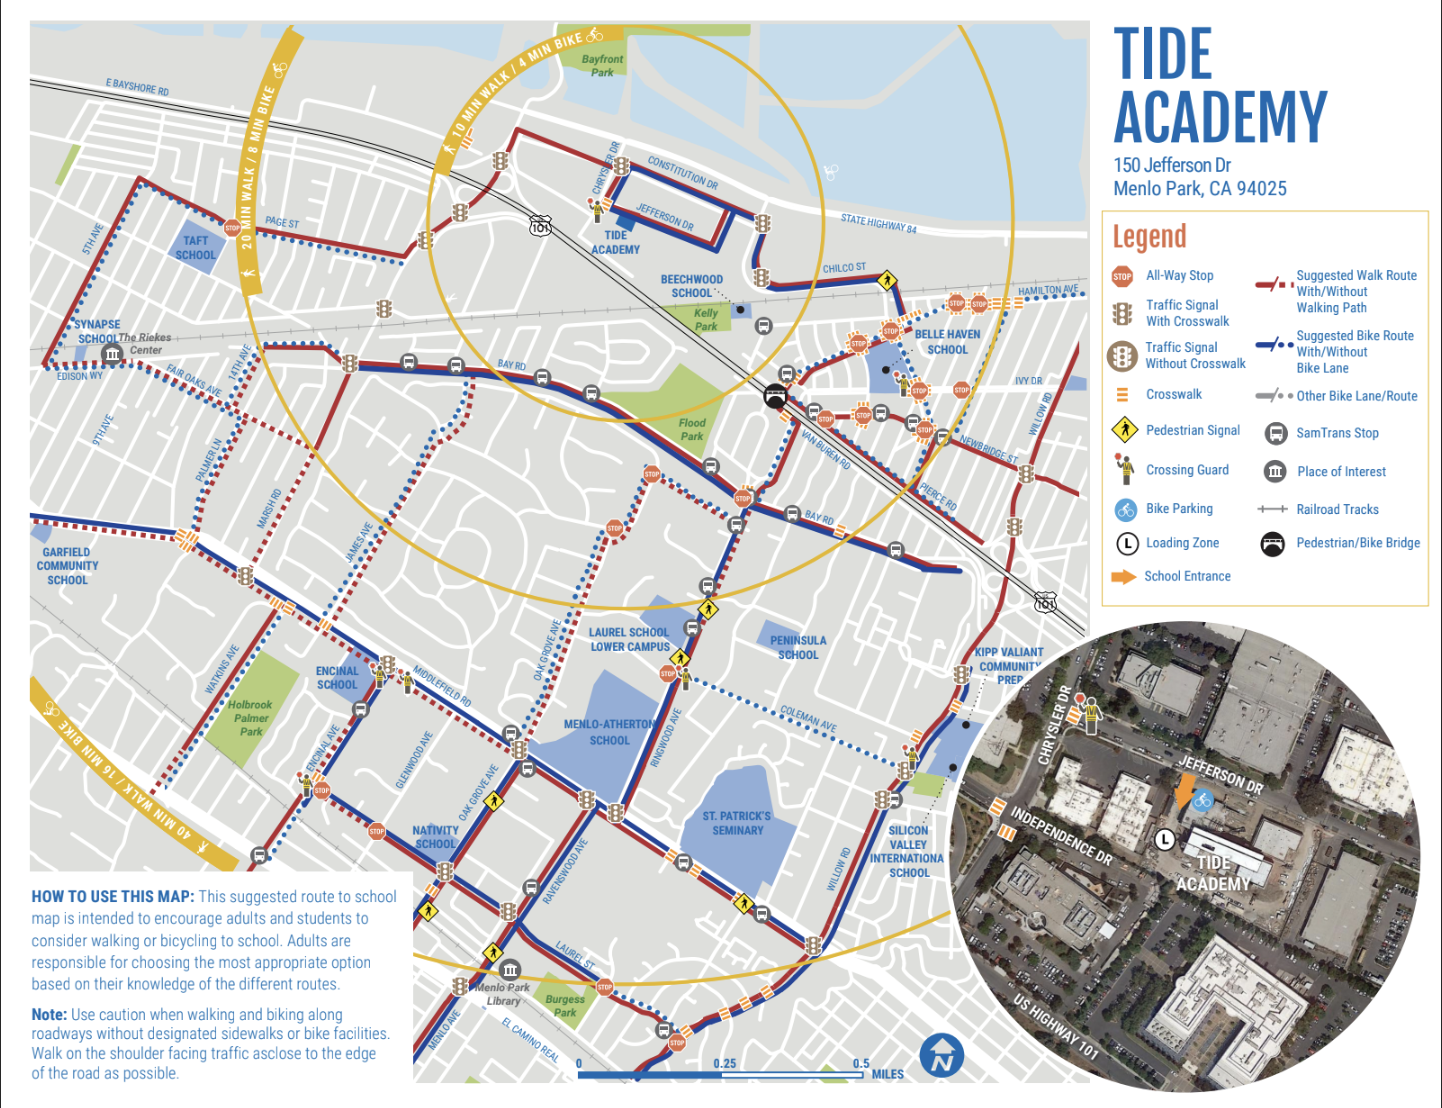 TIDE Suggested Safe Routes to School